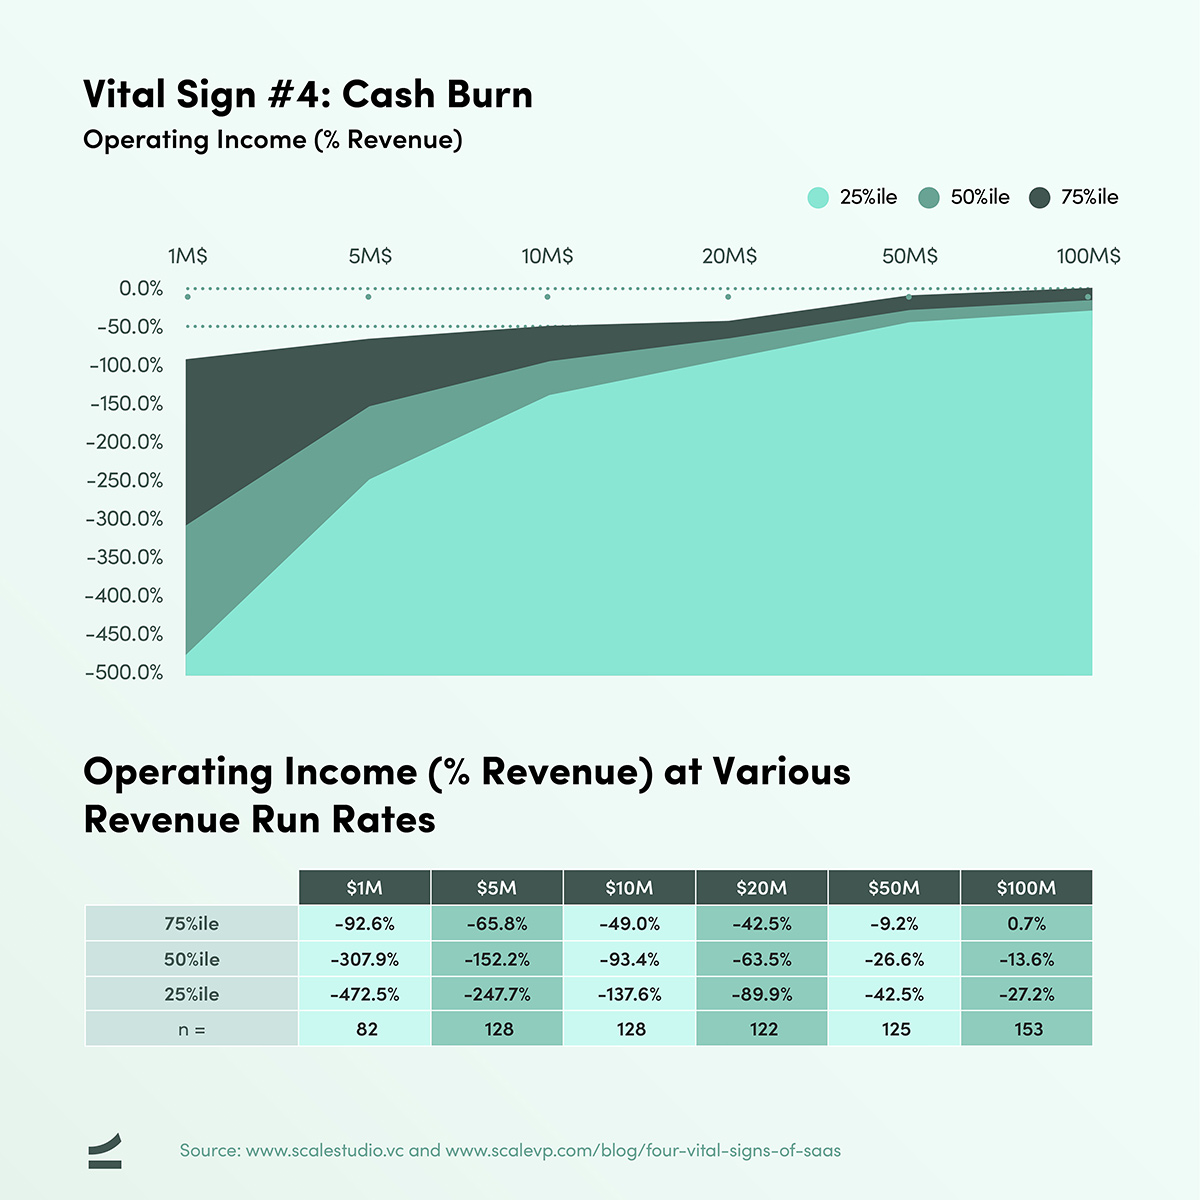 Four Vital Signs of SaaS - Operating Income - Cash Burn - chart and table